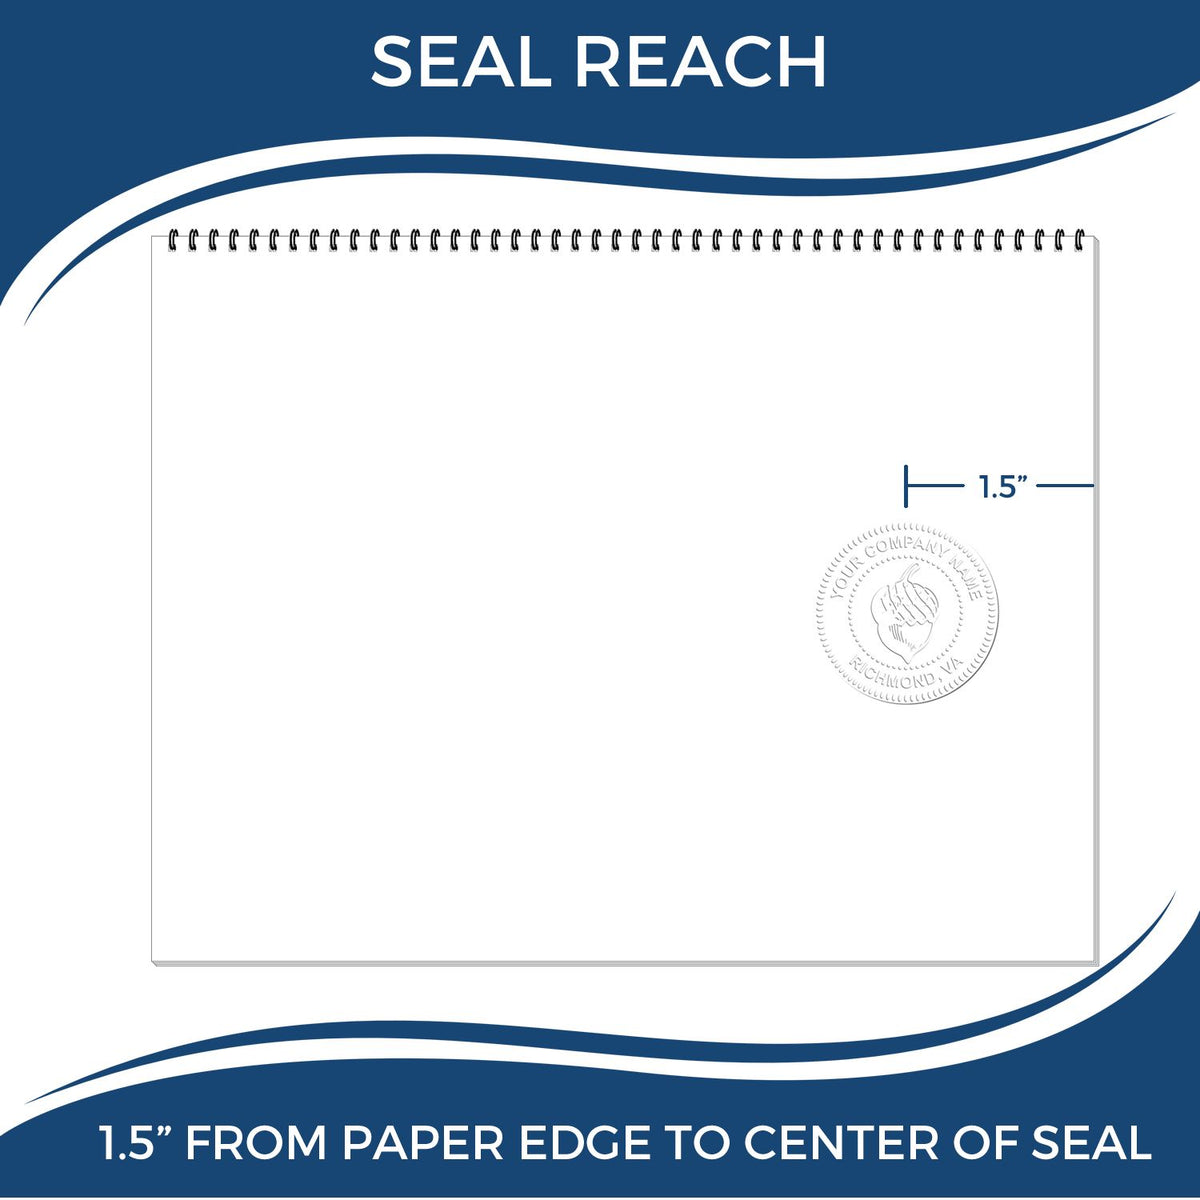 An infographic showing the seal reach which is represented by a ruler and a miniature seal image of the Gift Alabama Landscape Architect Seal